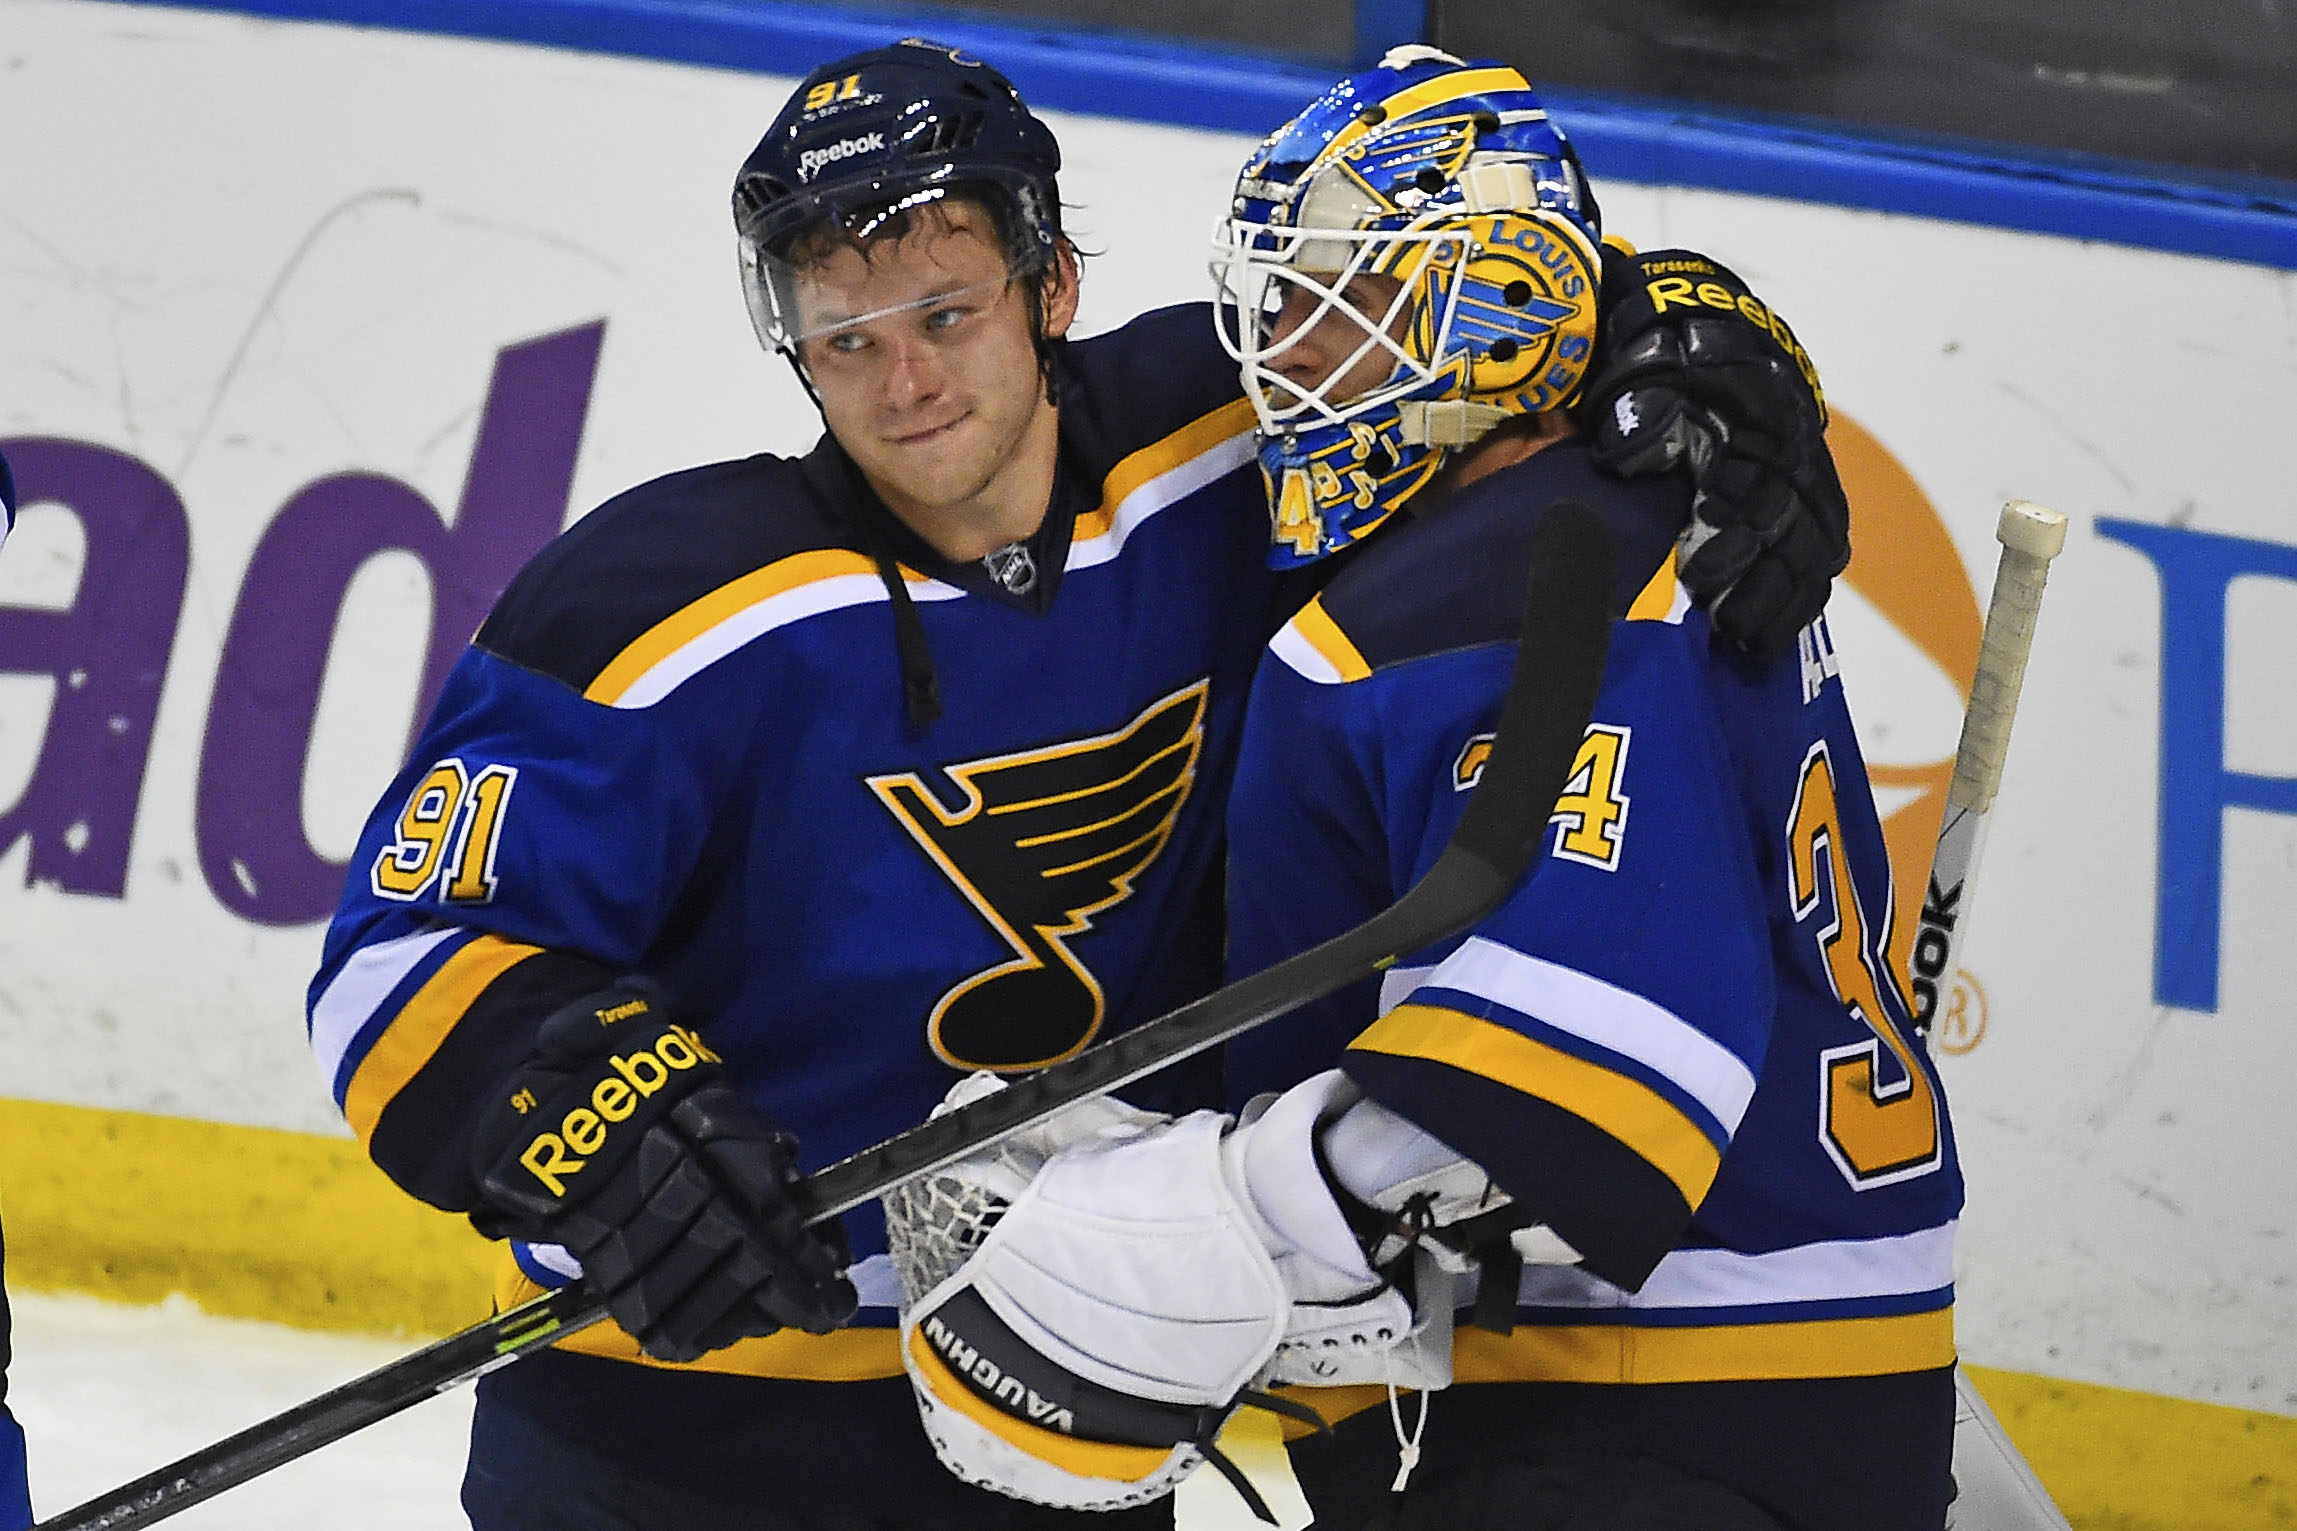 Oshie Does It Again Lifts Blues to Win over Wild